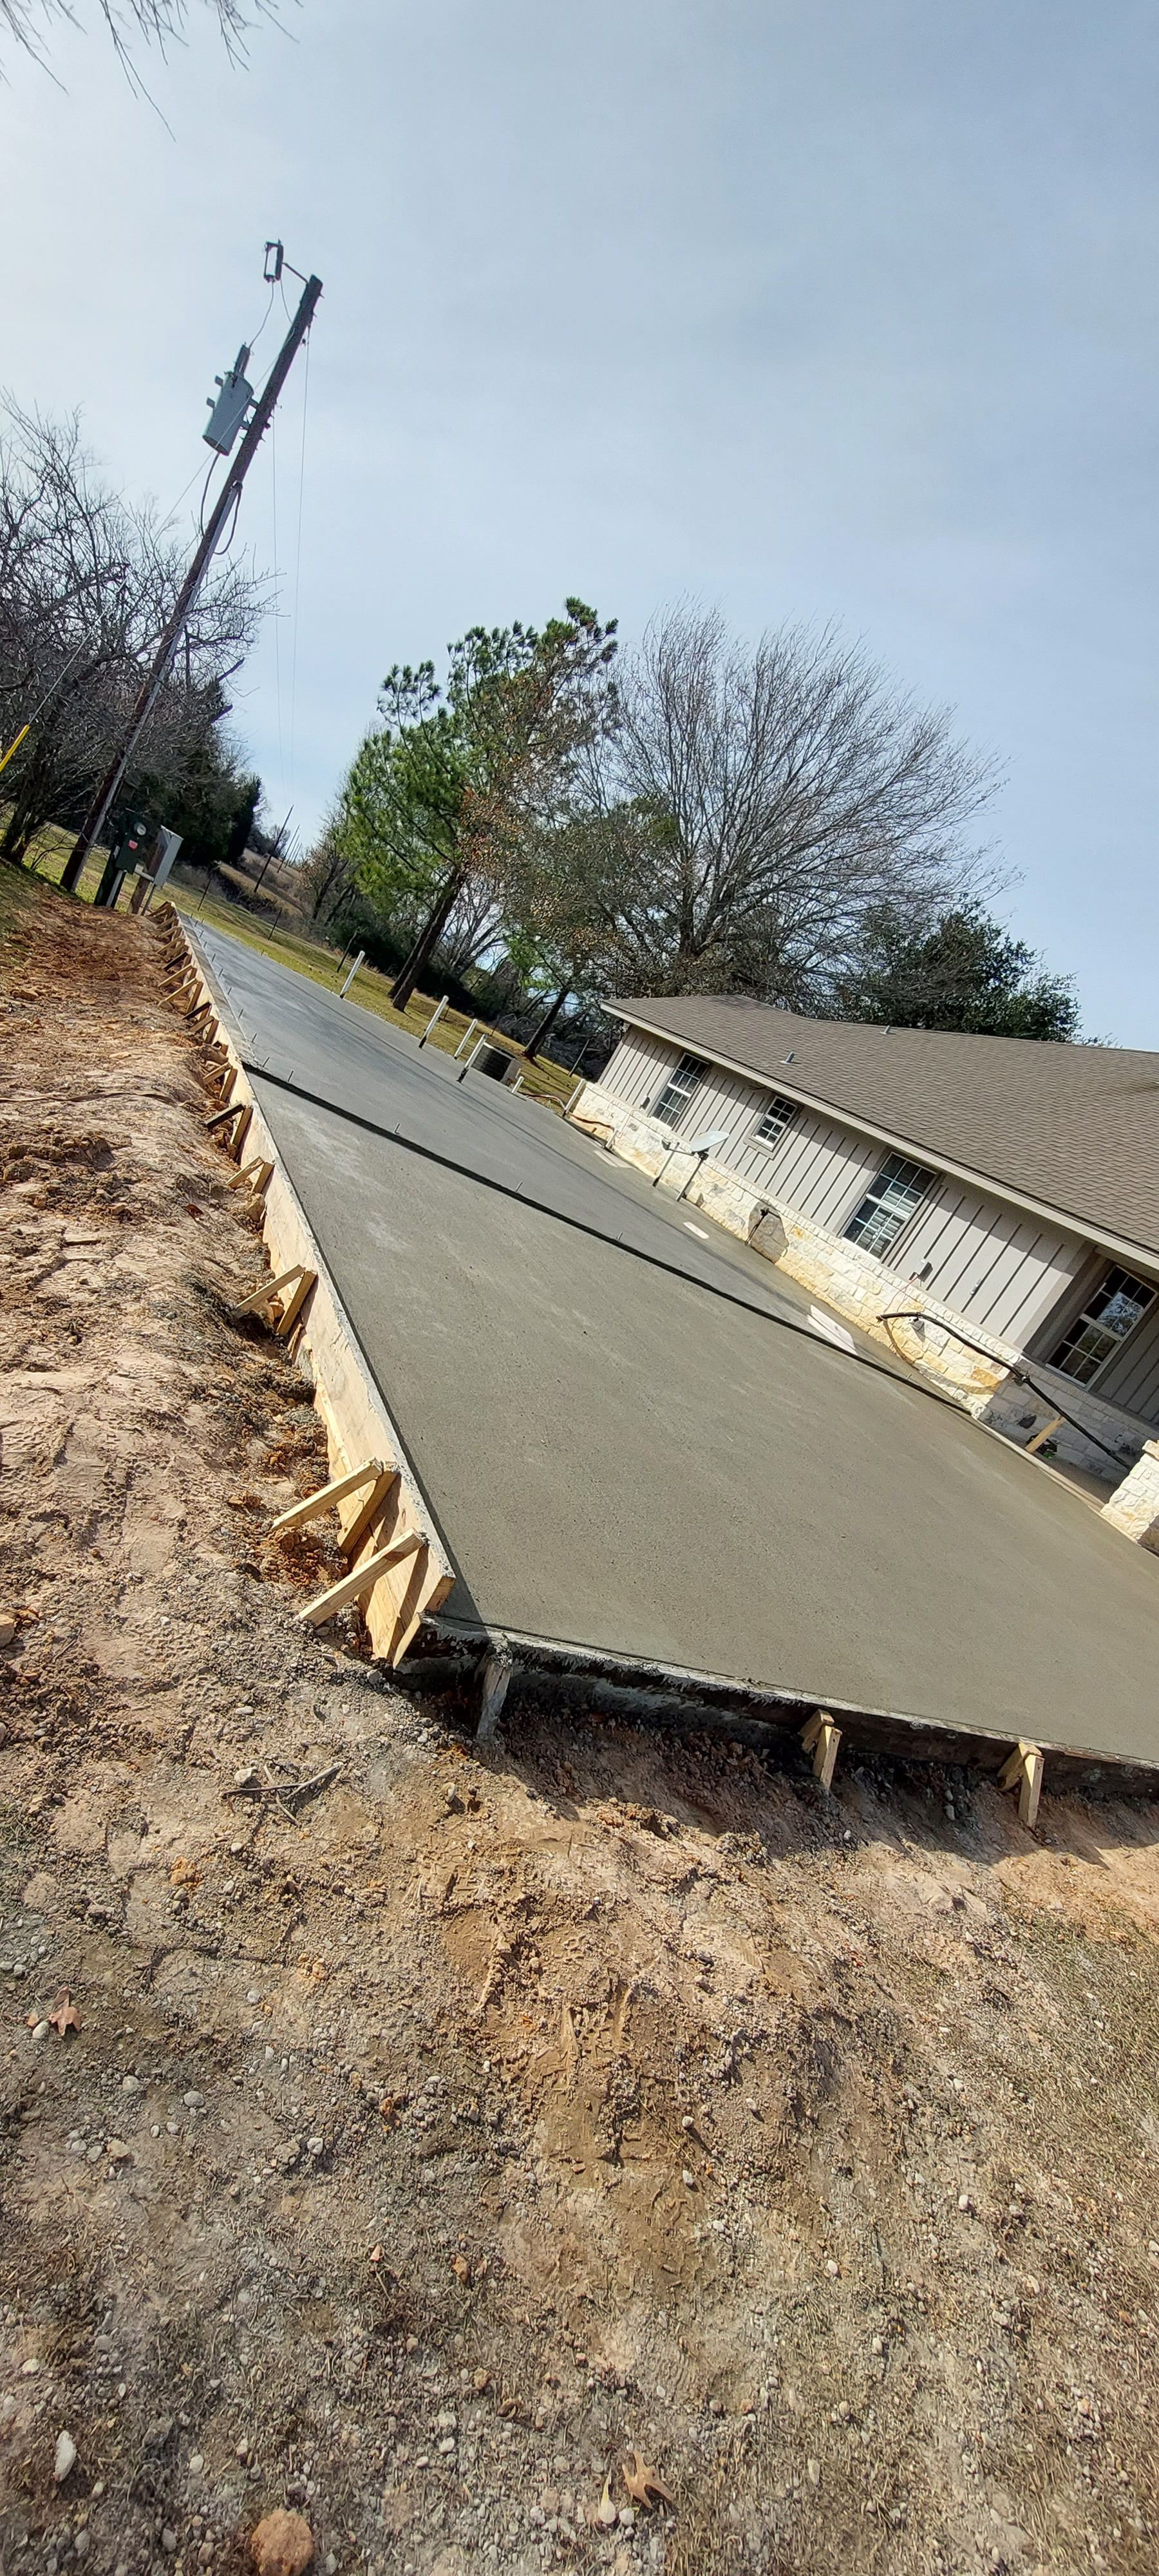  for Slabs on Grade - Concrete Specialist in Spring, TX